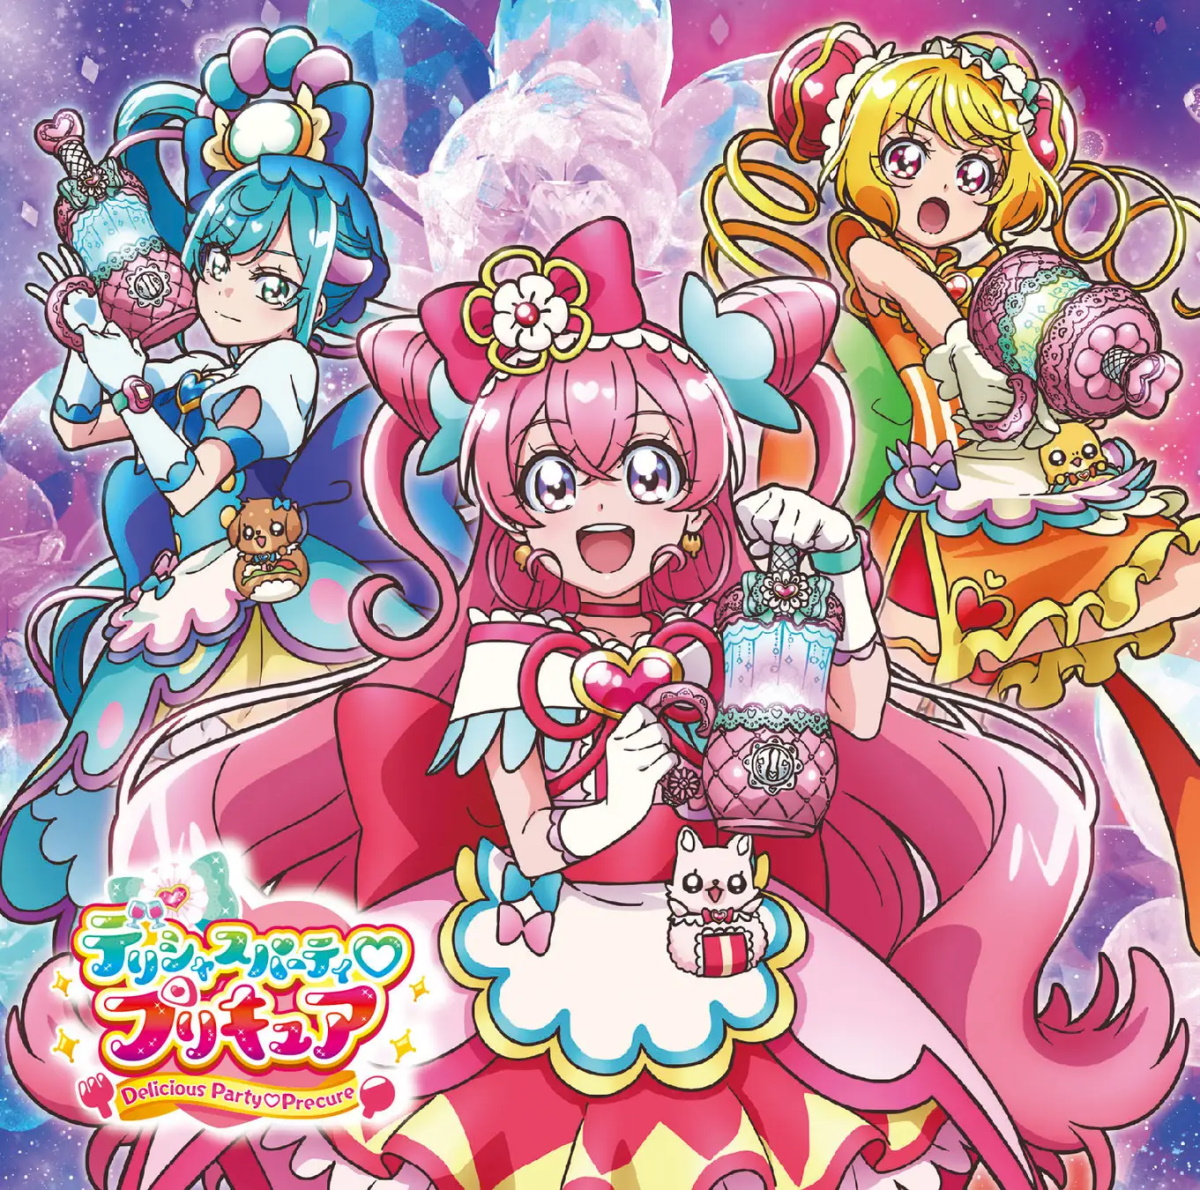 Cover art for『Machico - Cheers！デリシャスパーティ♡プリキュア』from the release『Delicious Party♡Pretty Cure Theme Song Single